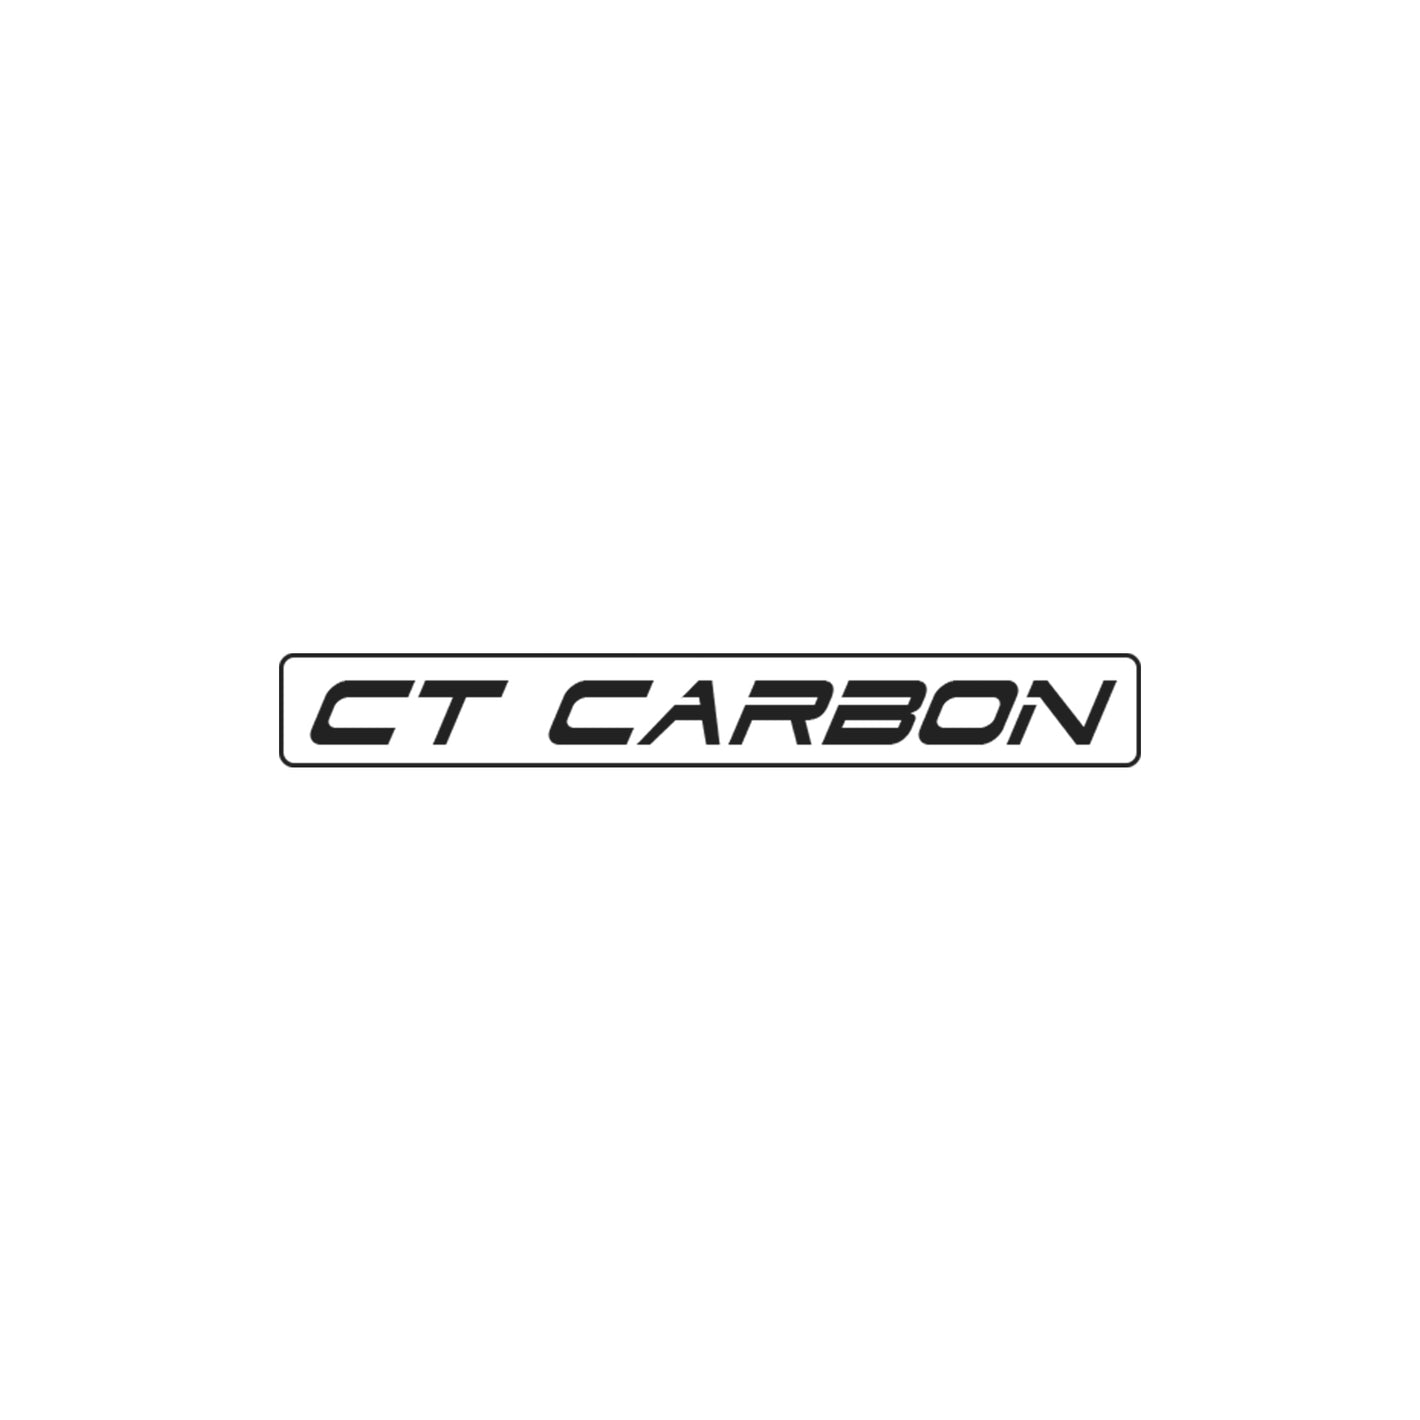 All CT Carbon Products